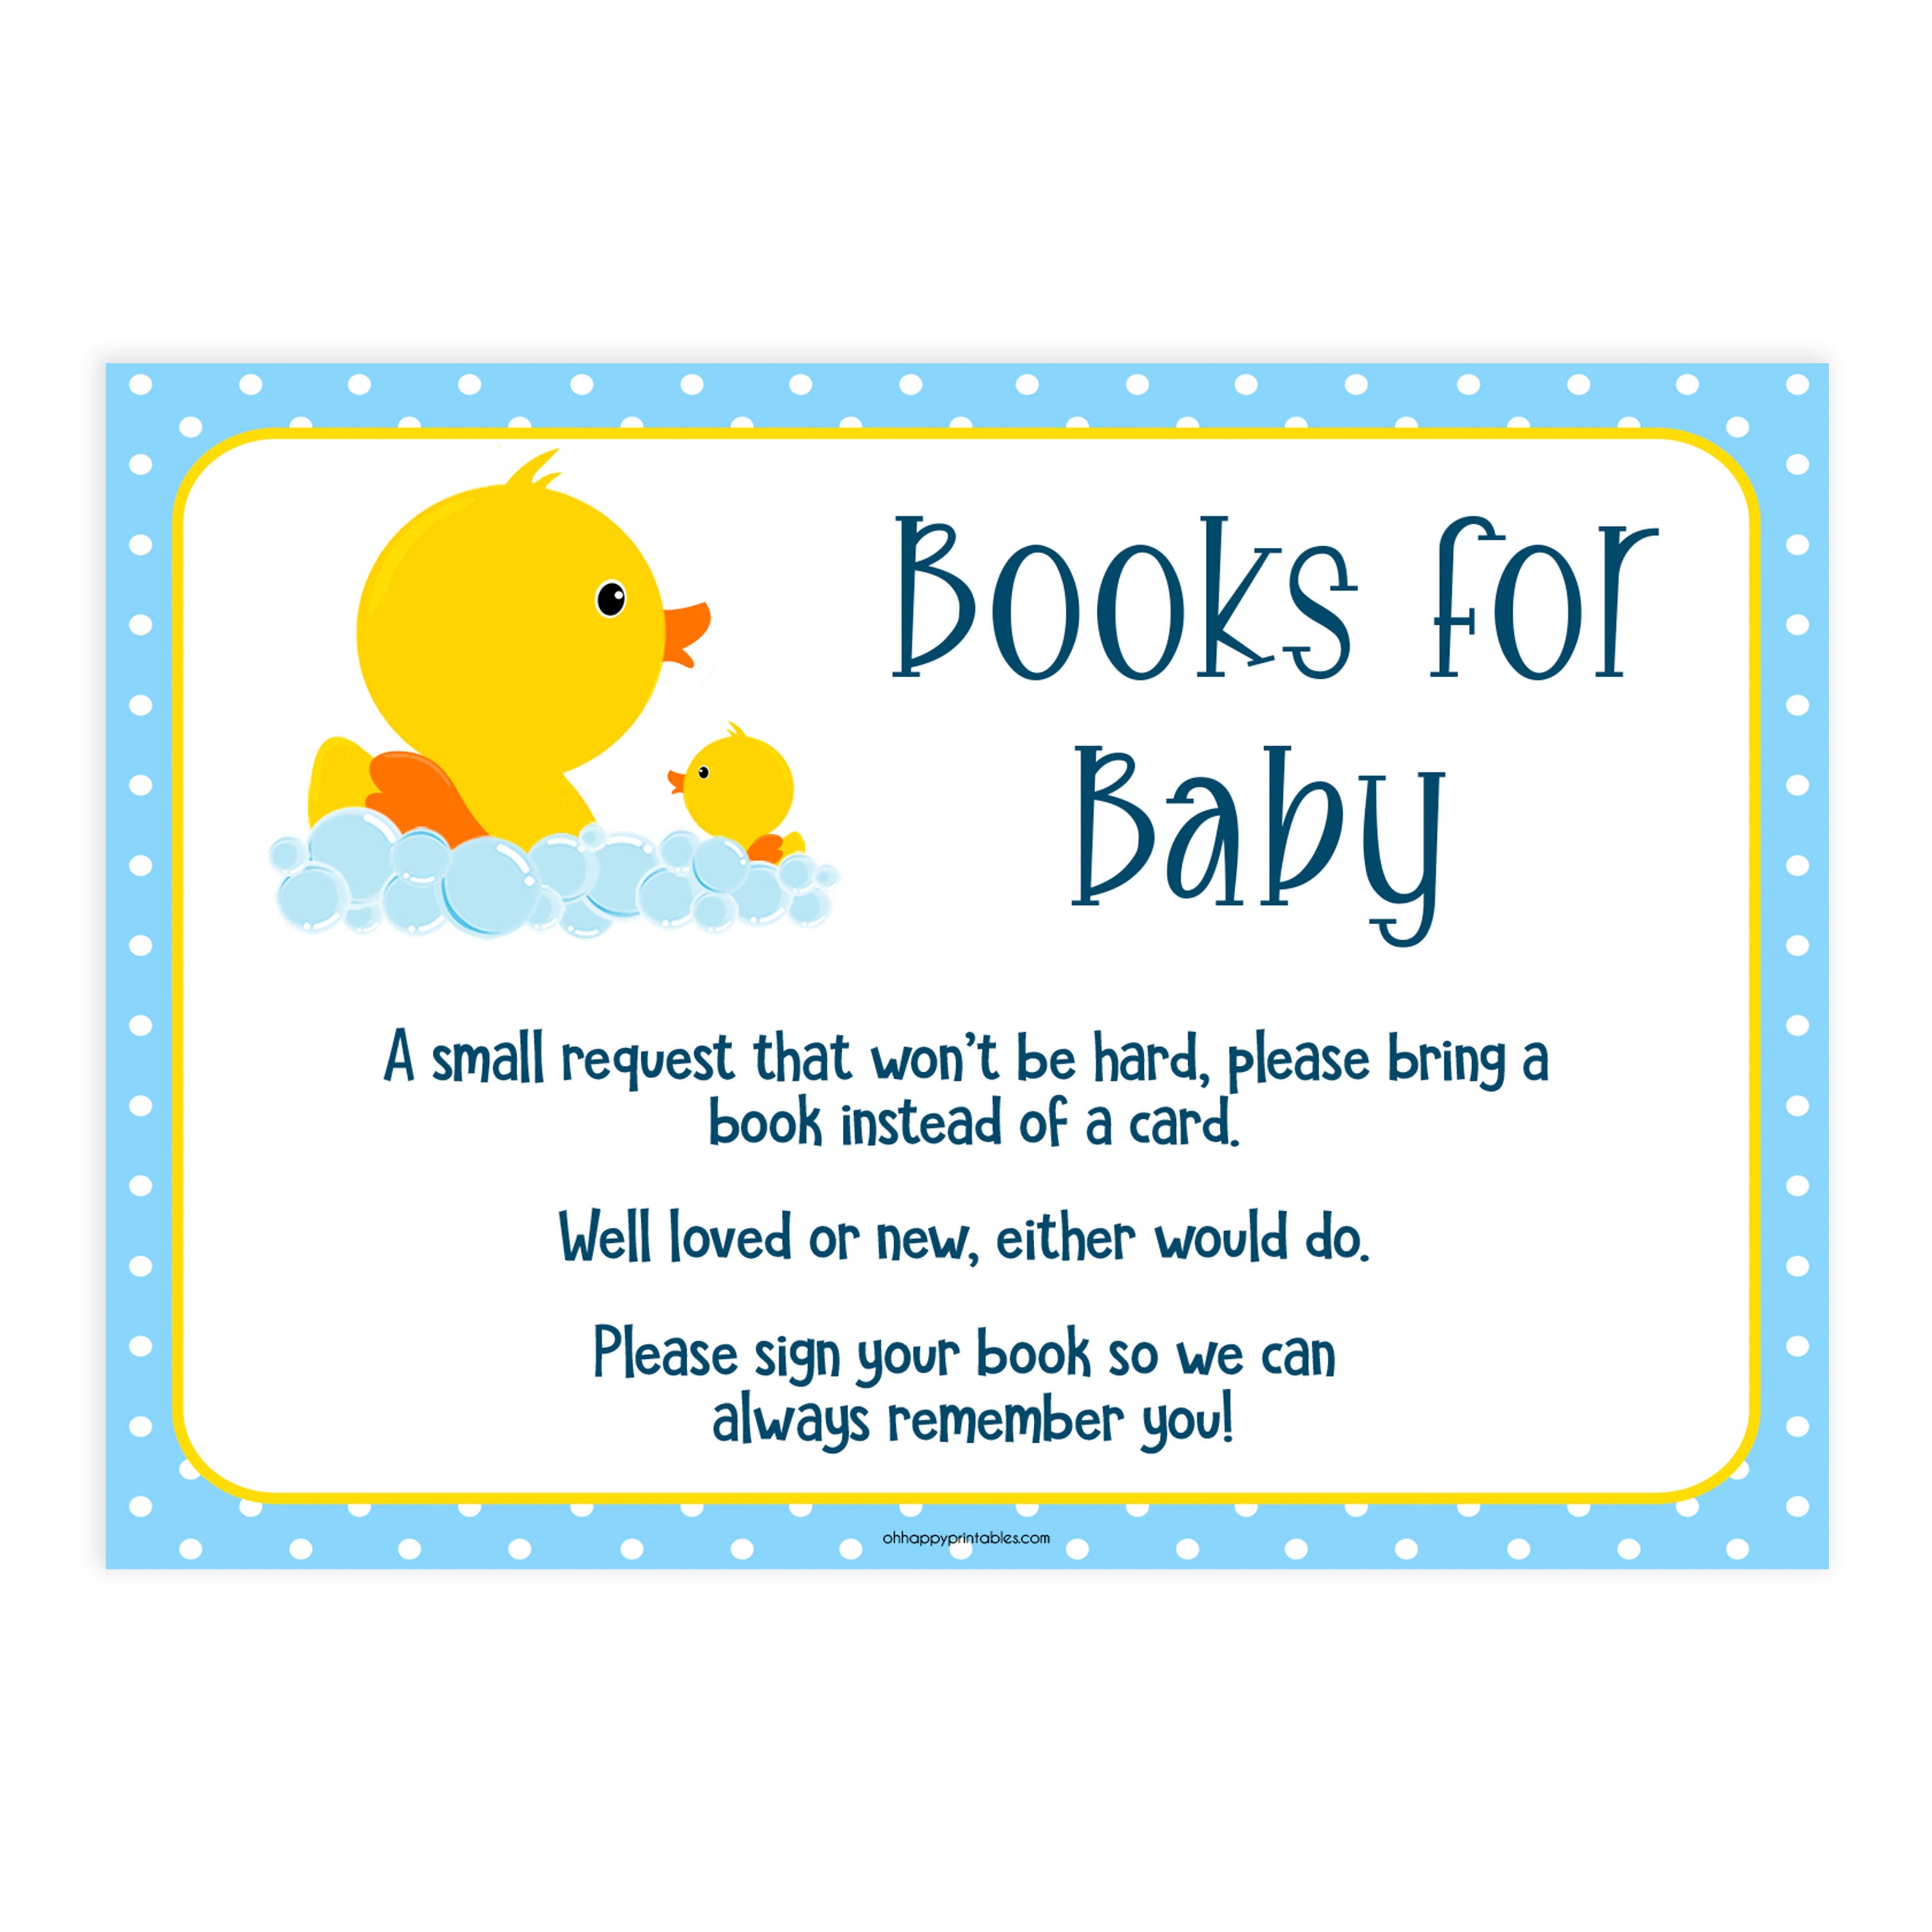 books for baby, rubber ducky baby shower games, bring a book for baby, rubber ducky baby shower, top baby games, printable baby shower games, top baby games